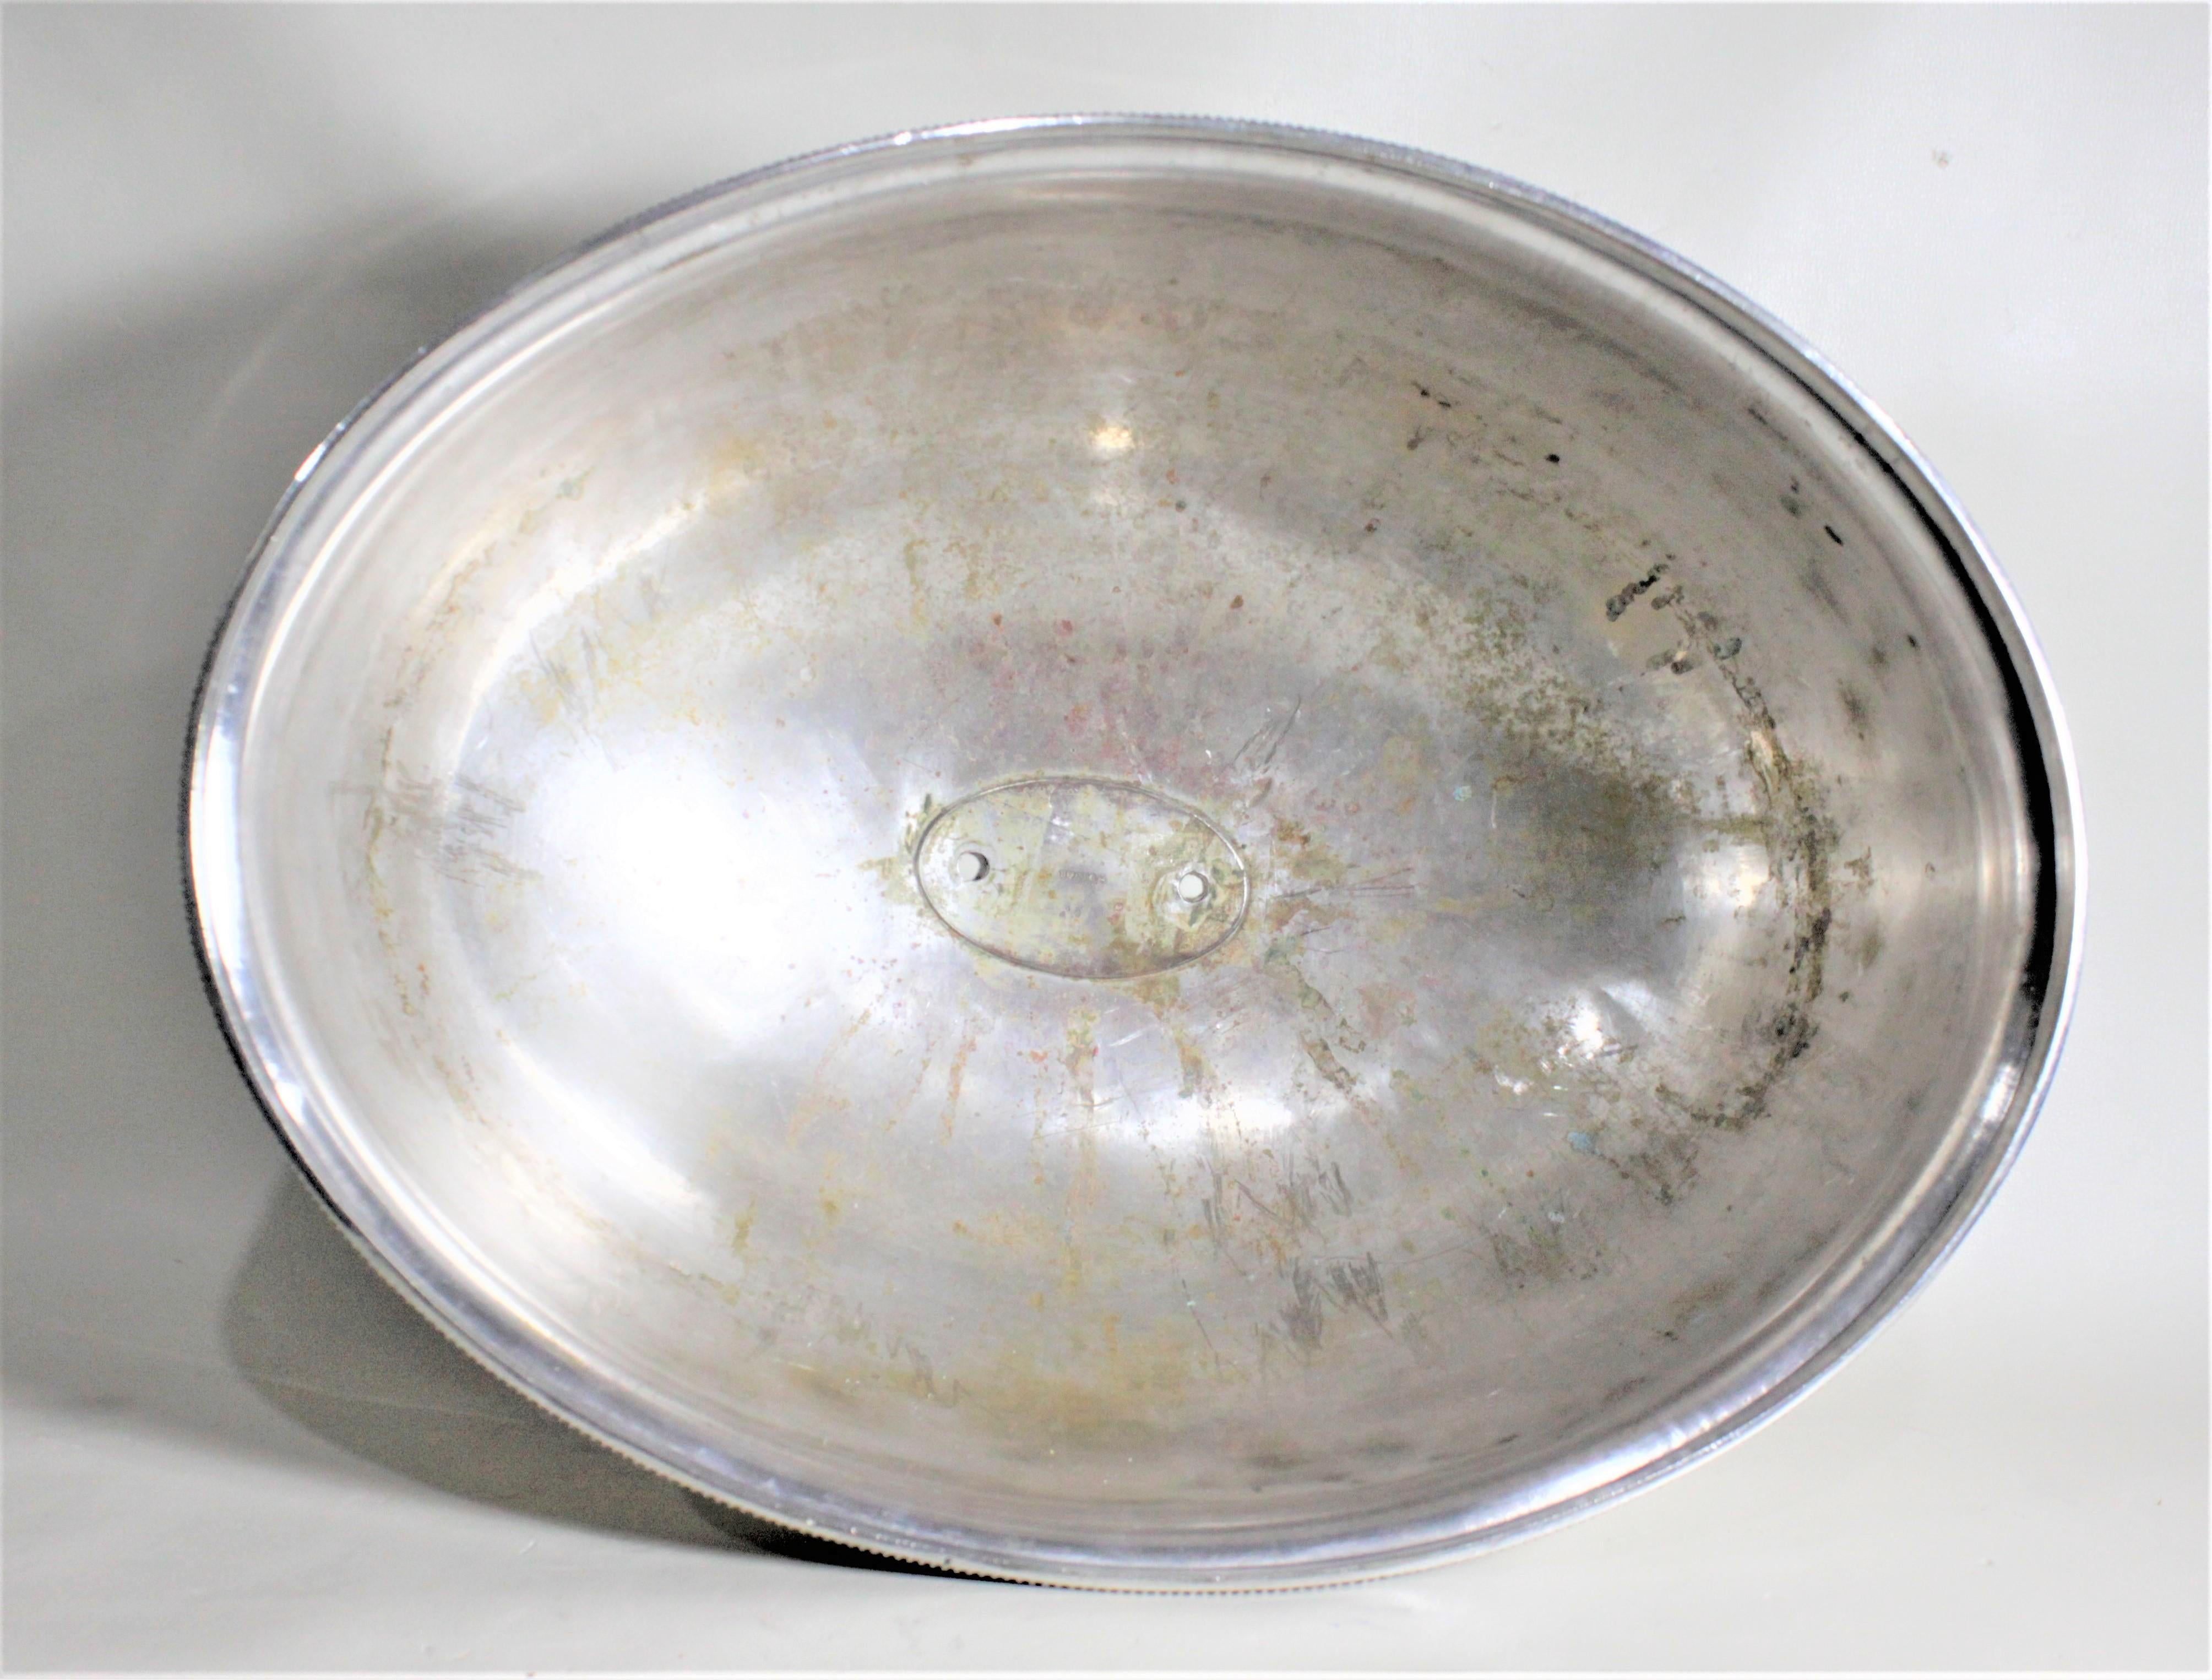 19th Century Antique Silver Plated Converted Meat Dome Ice Trough, Wine Cooler or Centerpiece